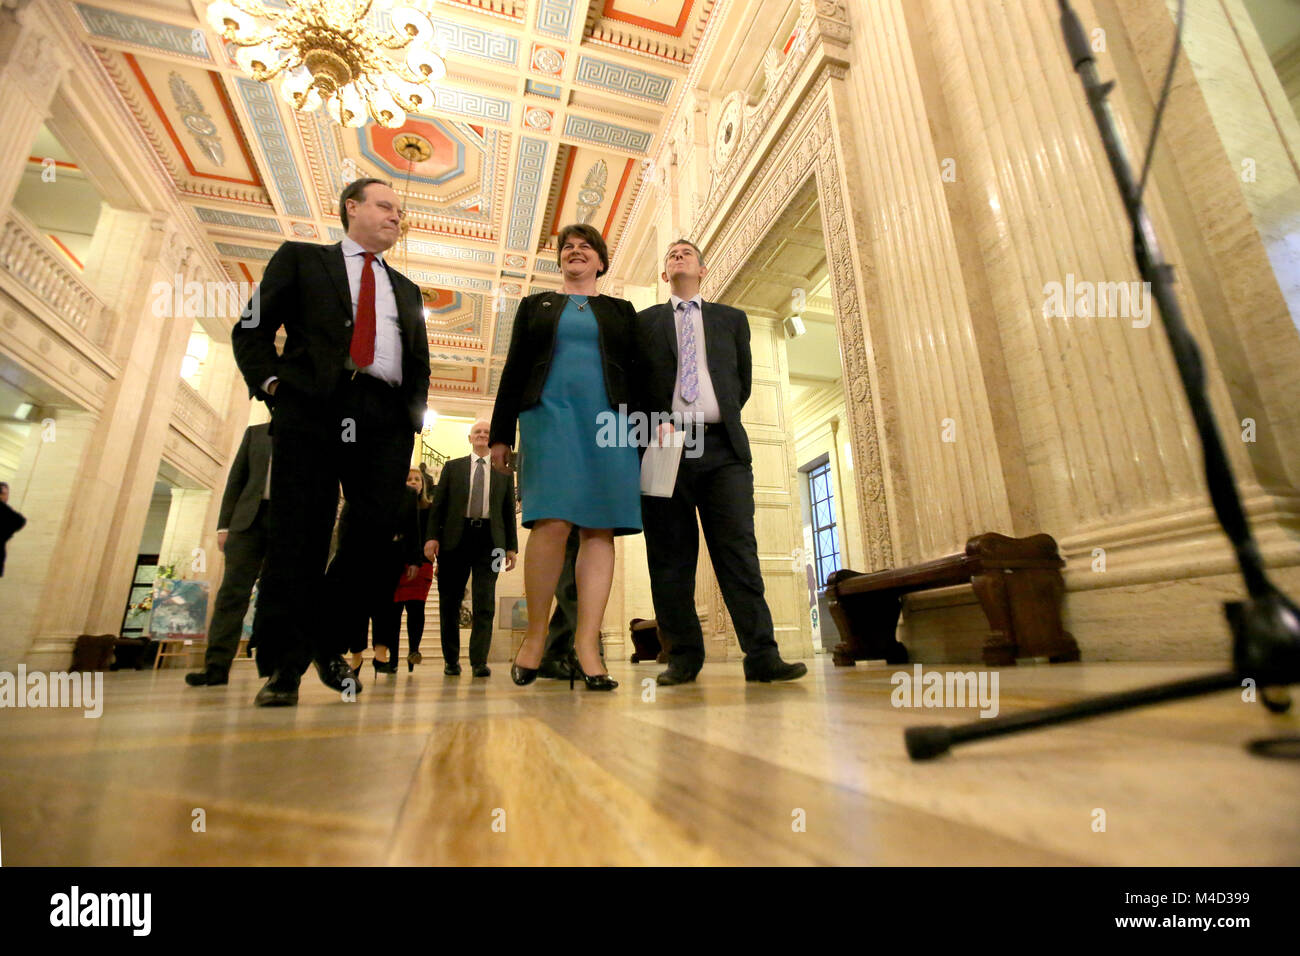 DUP Leader Arlene Foster speaks to the media inside Stormont Parliament Buildings,  Belfast, Monday, Feb 12th, 2018. Britain's Prime Minister Theresa May and Irish Prime Minister Leo Varadkar are to visit Belfast later for talks with the Stormont parties. The Prime Ministers left without a deal to restore devolved government. Stock Photo